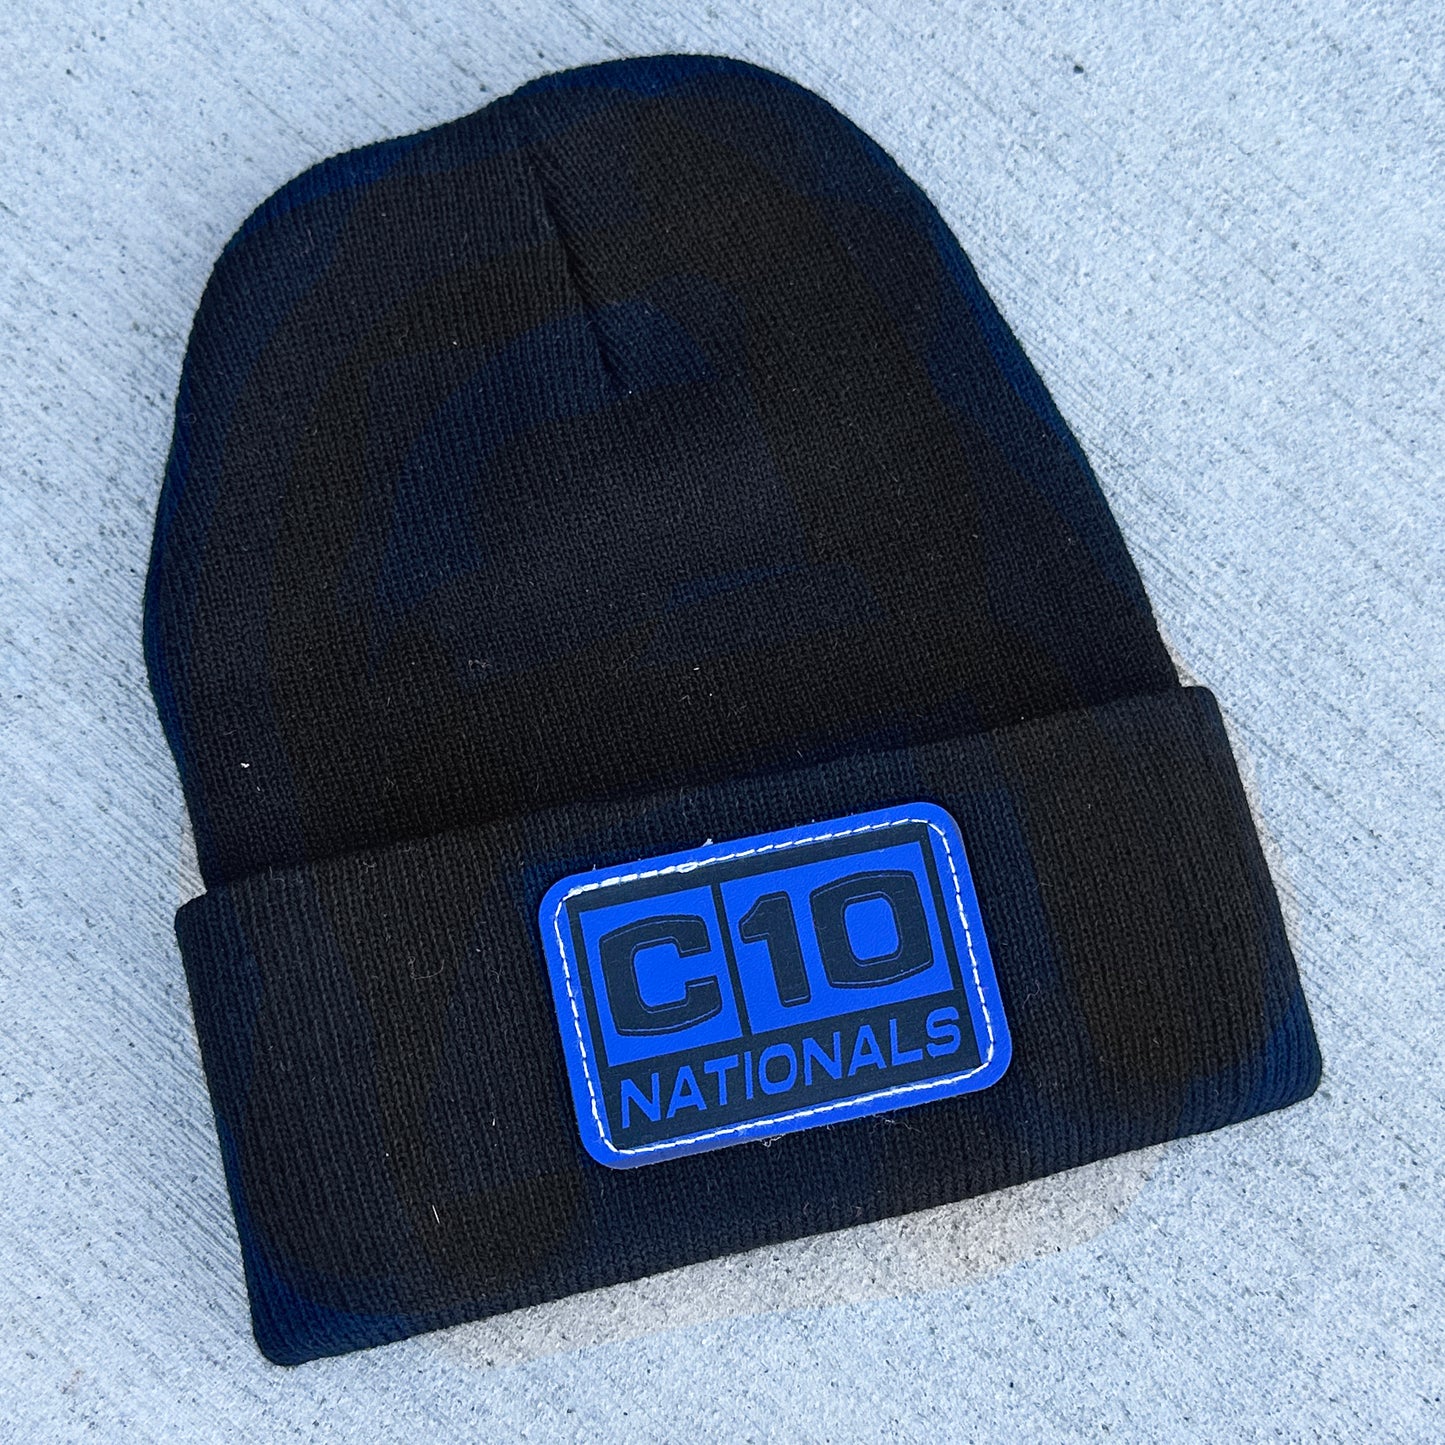 C10 Nationals® Beanies with Leather Logo Patch